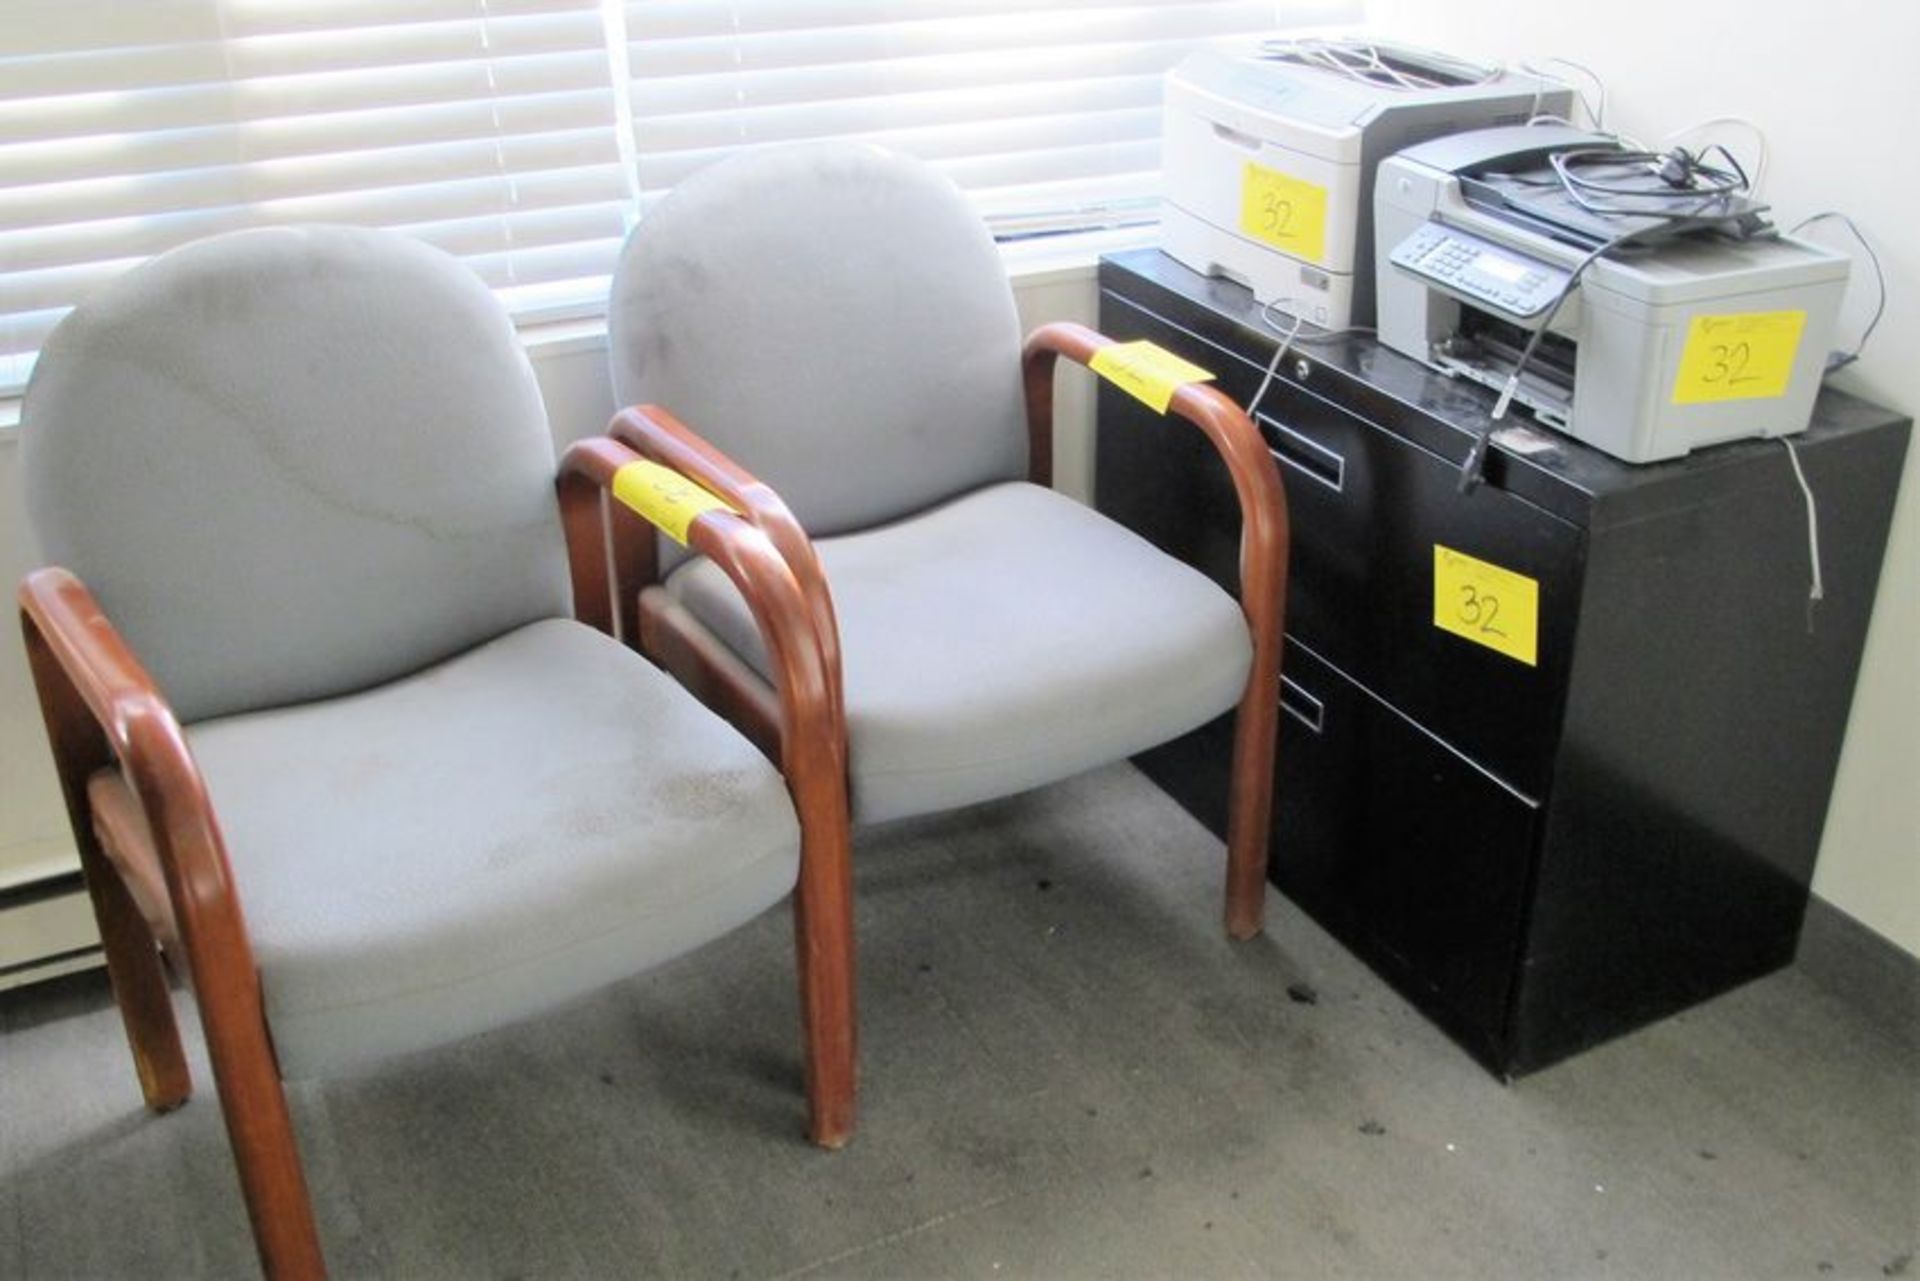 LOT OF ASST. OFFICE FURNITURE, DESK, CHAIRS, SHELVES, FILE CABINET, PRINTERS, MONITORS, KEYBOARDS, - Image 3 of 6